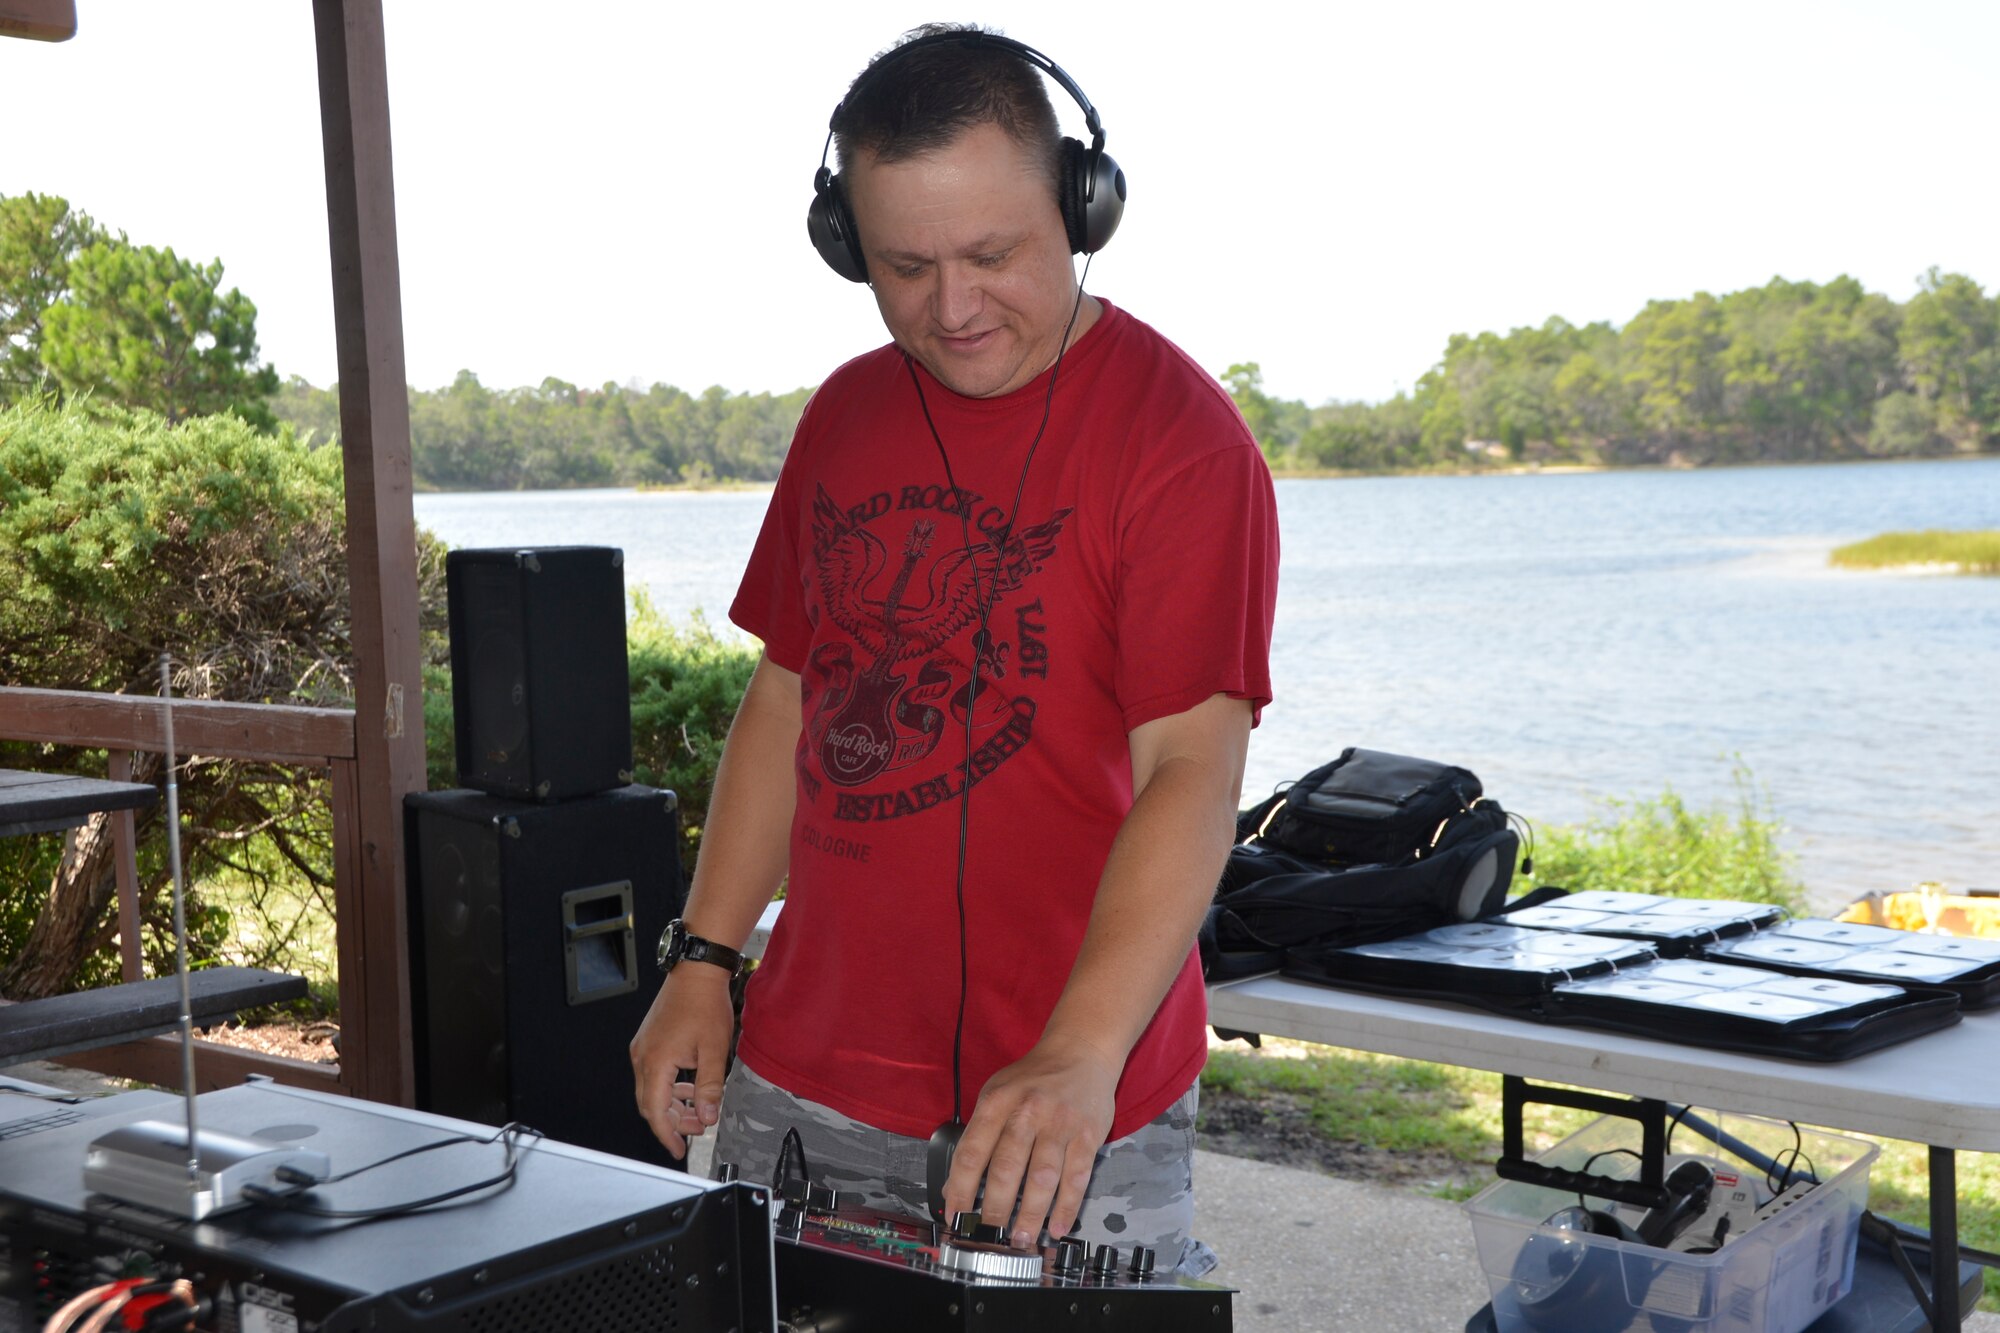 Master Sgt. John Fuschich, National Security and Emergency Preparedness directorate, offered up the disc-jockey jams for the 1st Air Force (Air Forces Northern) “Family Day 2015” Aug. 7 at Bonita Bay. The day focused on taking care of the organization’s families and featured a variety of activities that included food and sport competitions, a waterslide and plenty to eat and drink. (Air Force Photo Released/Mary McHale)